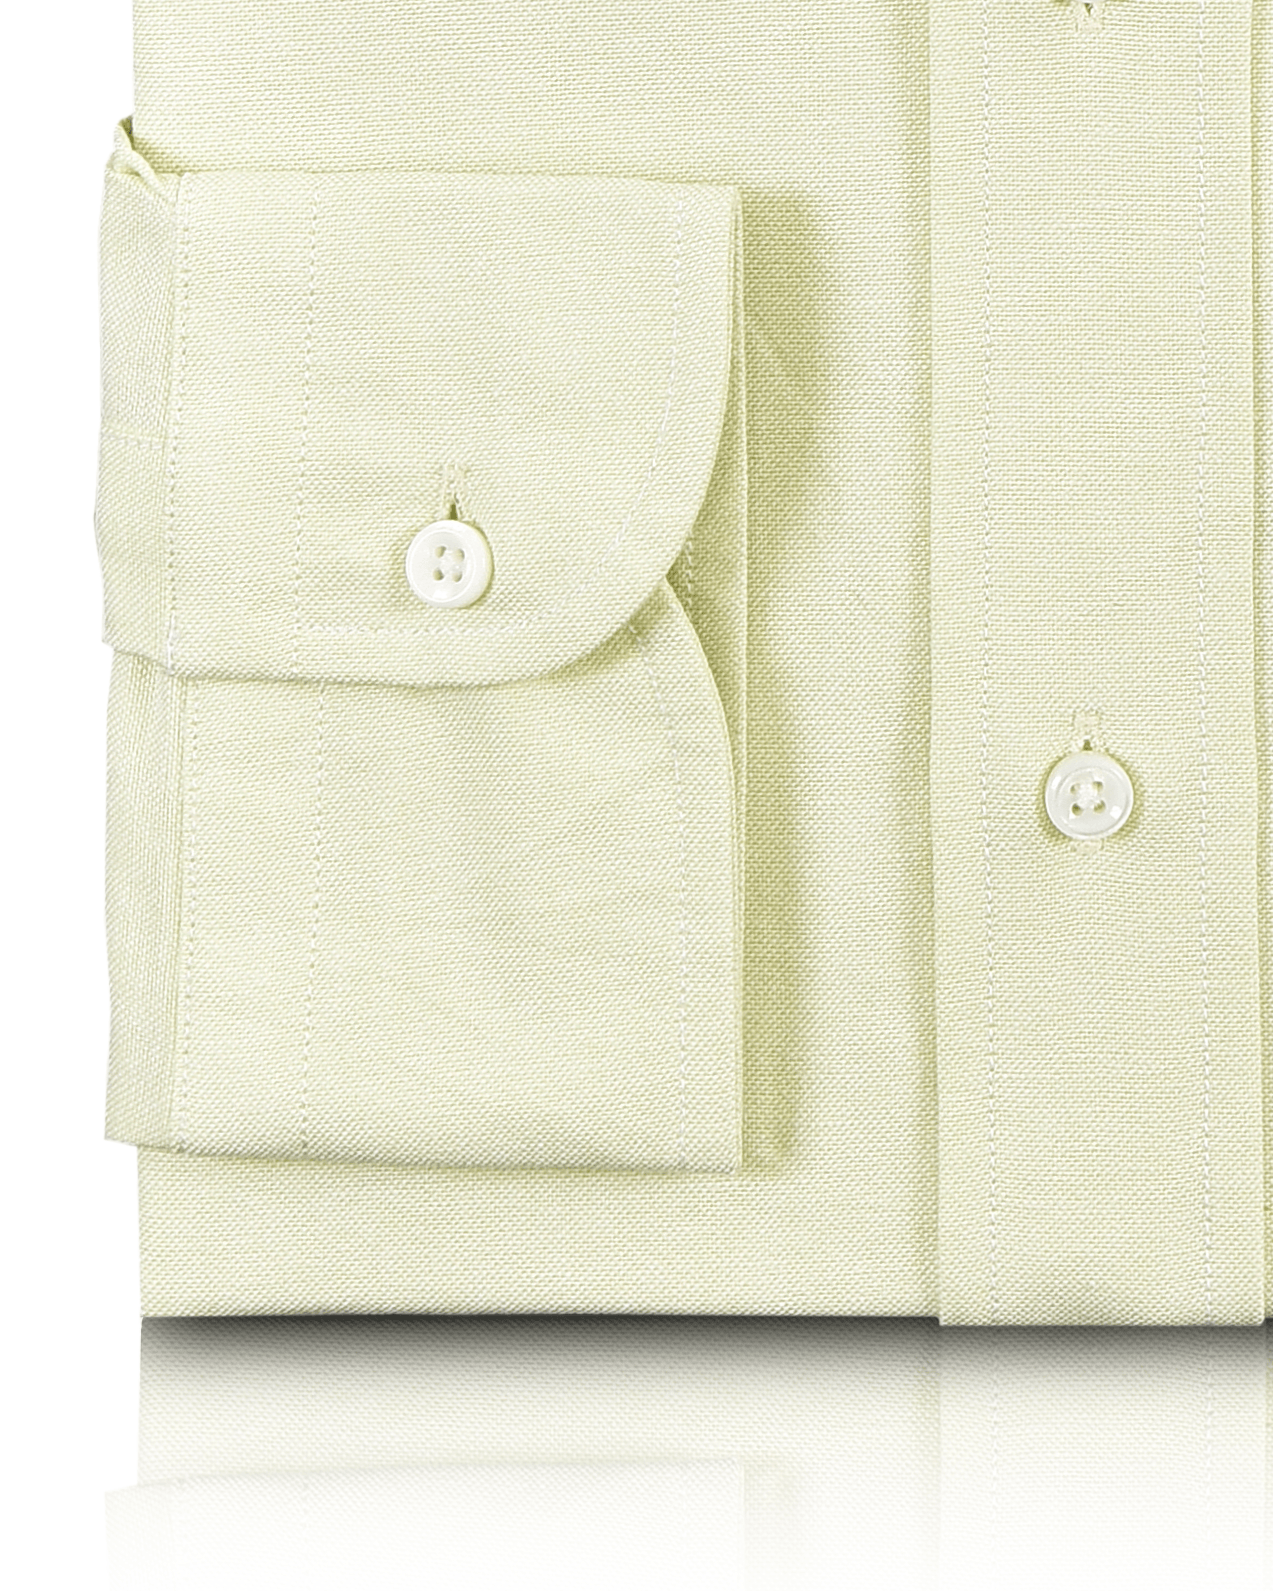 Cuff of the custom oxford shirt for men by Luxire in pale green